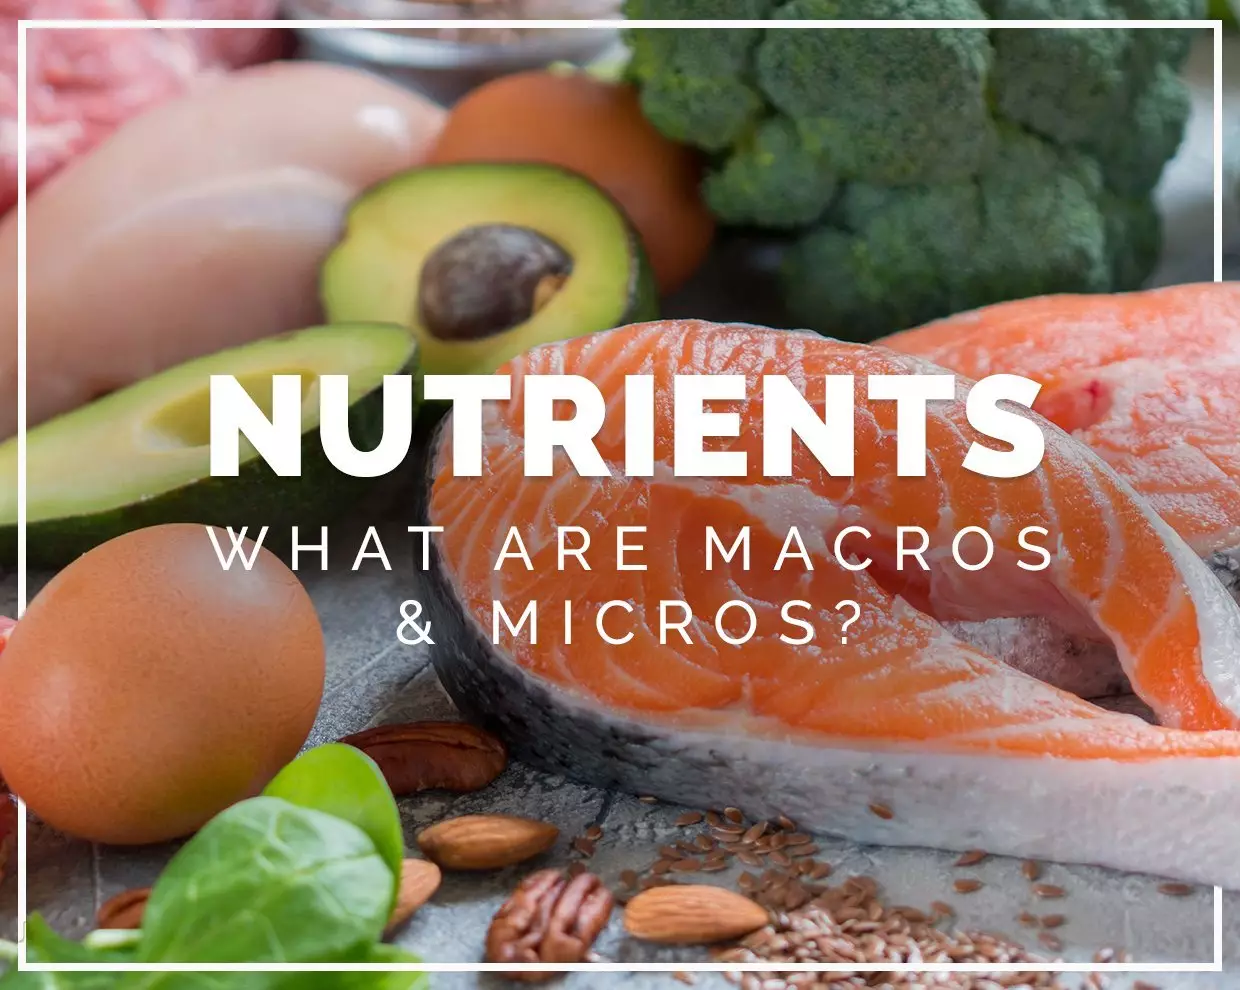 Nutrients: What are macros and micros?